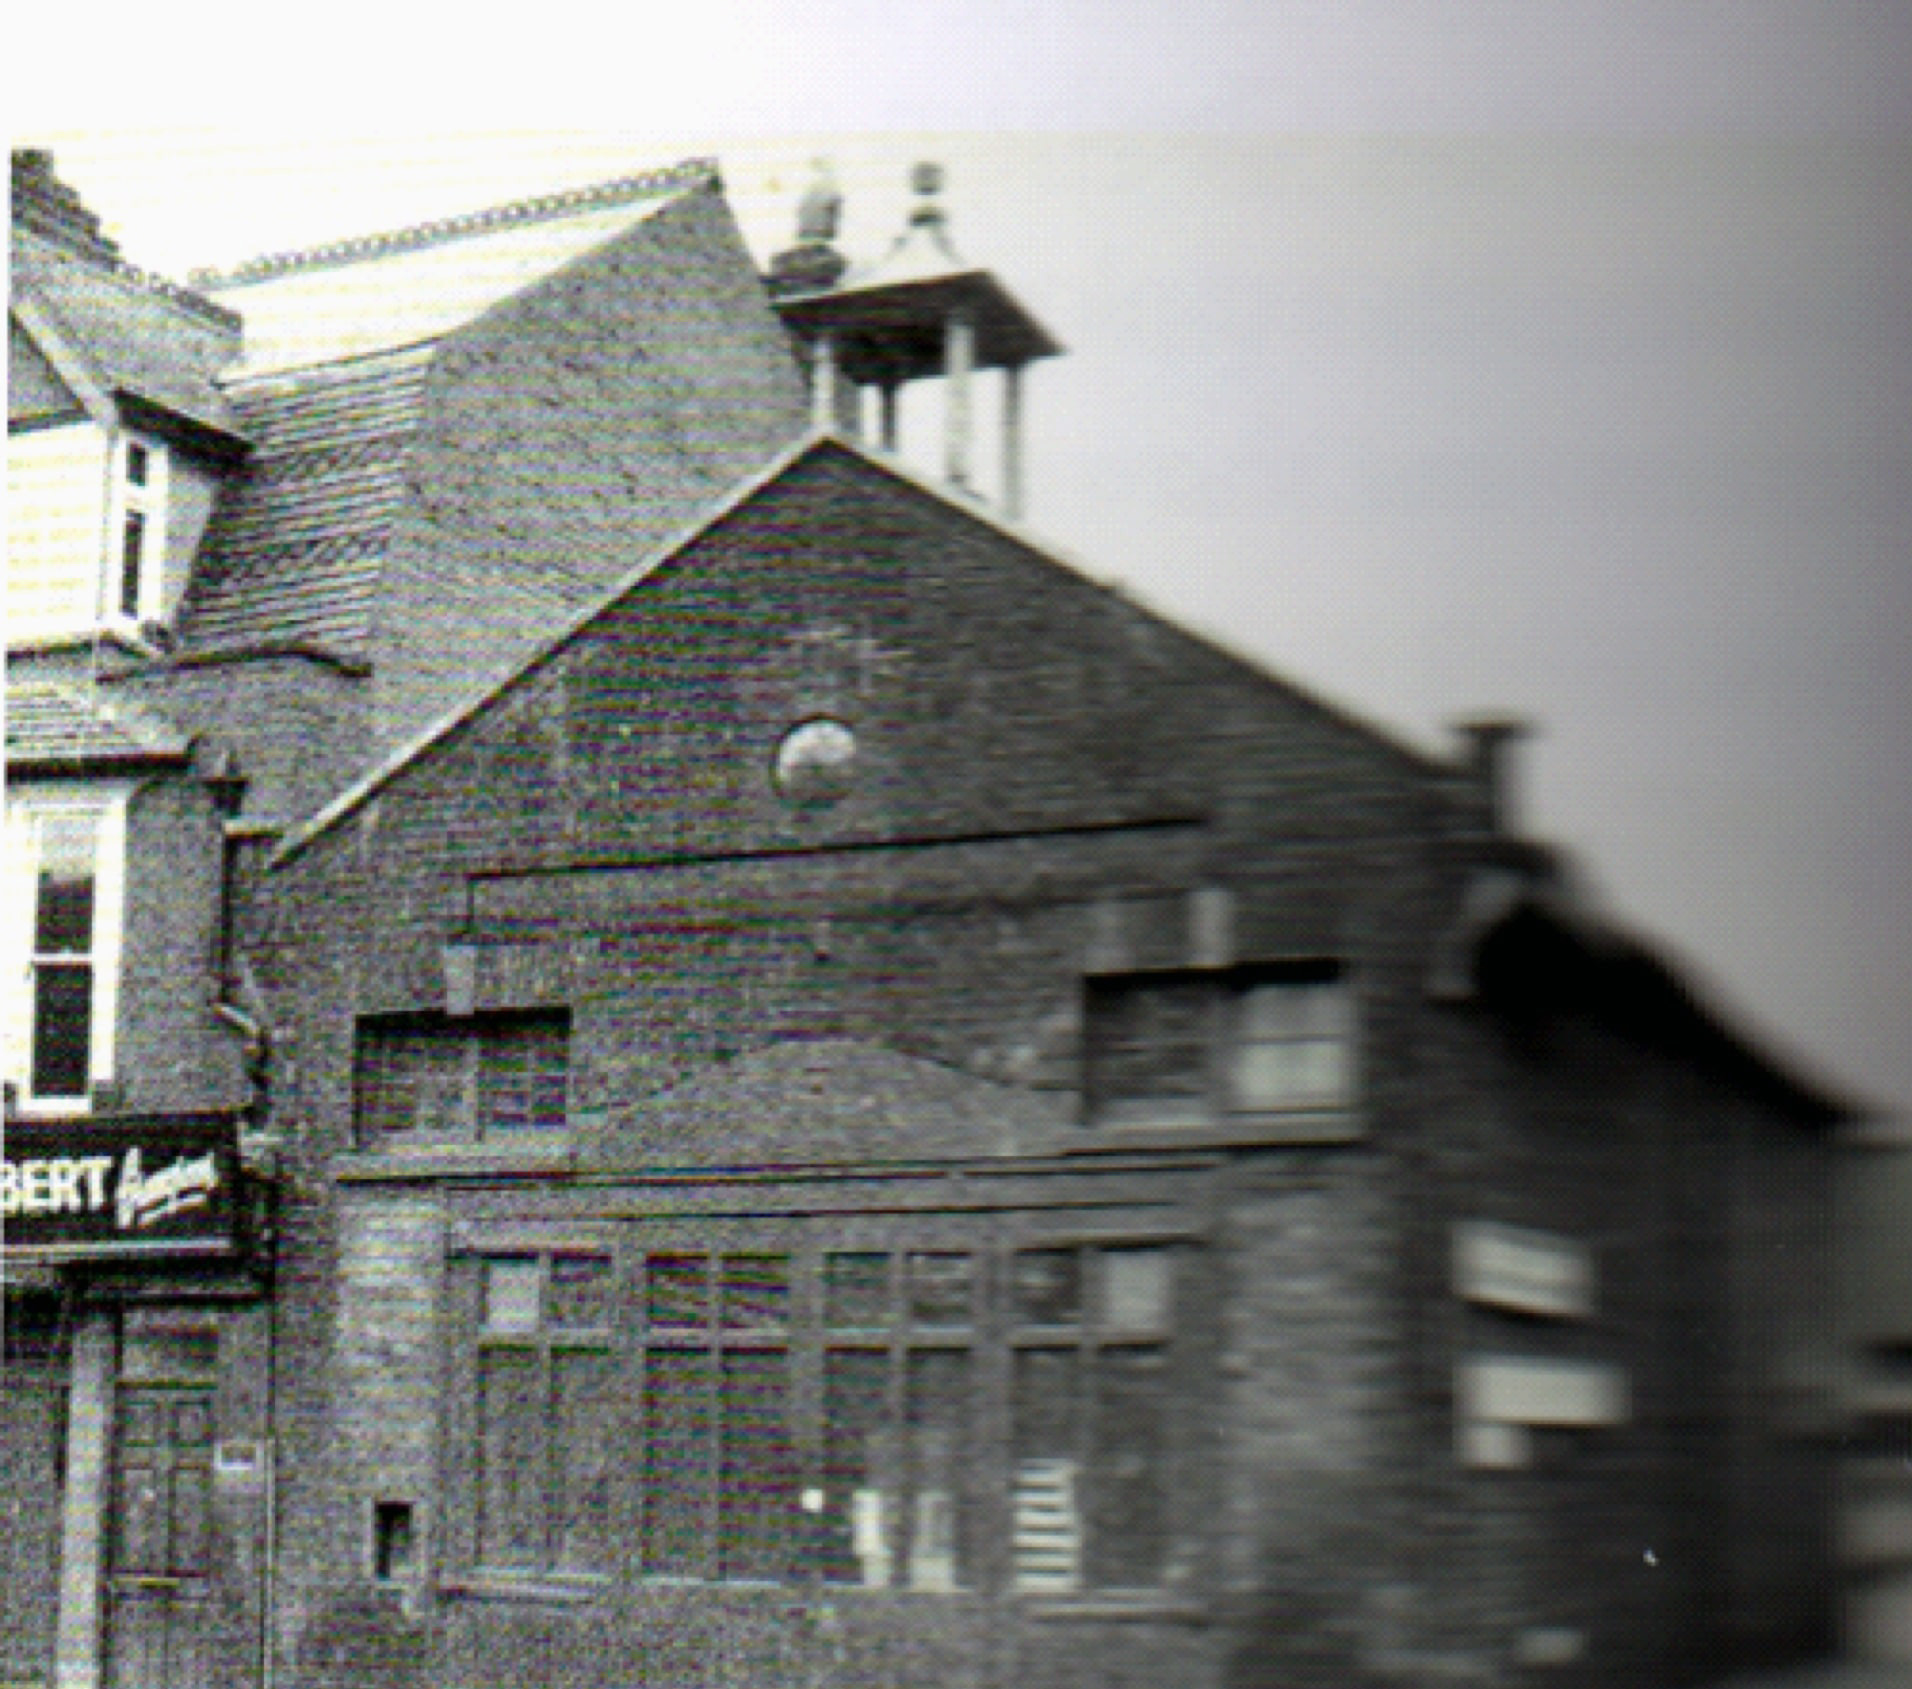 Black and white photo of front view of fire station on Upper High Street, Chesham